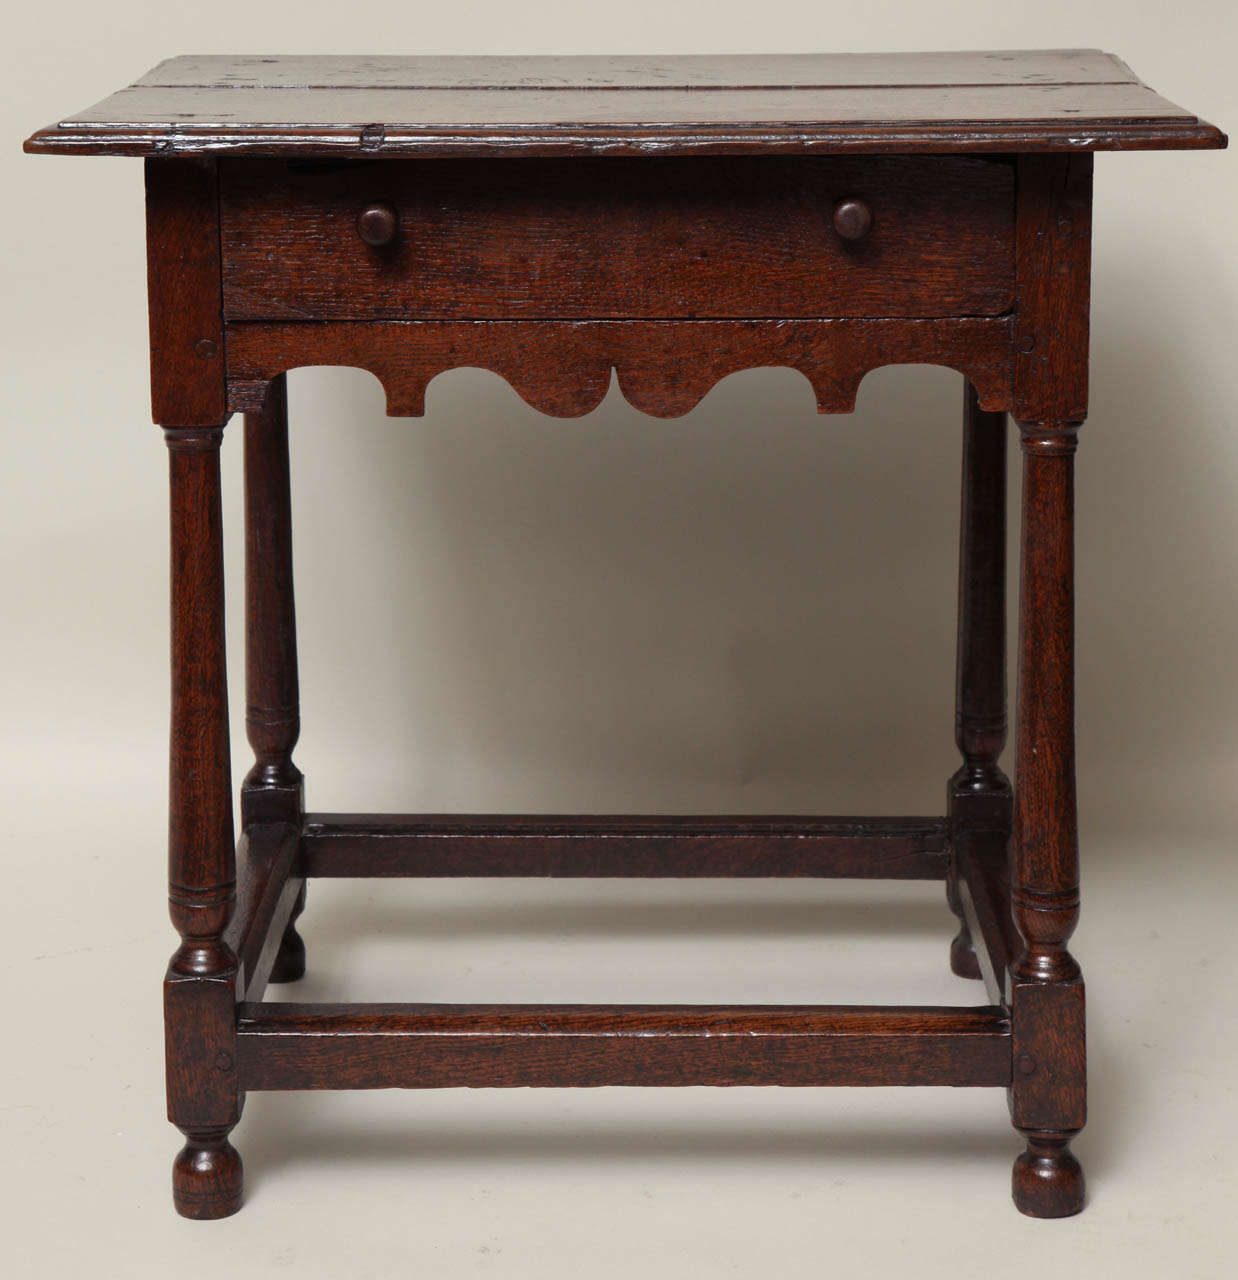 Good early 18th Century English oak single drawer side table, the thumb molded two plank top over single drawer having original turned fruitwood knobs, over cannon barrel legs joined by box stretcher, standing proud on original turned bun feet, the